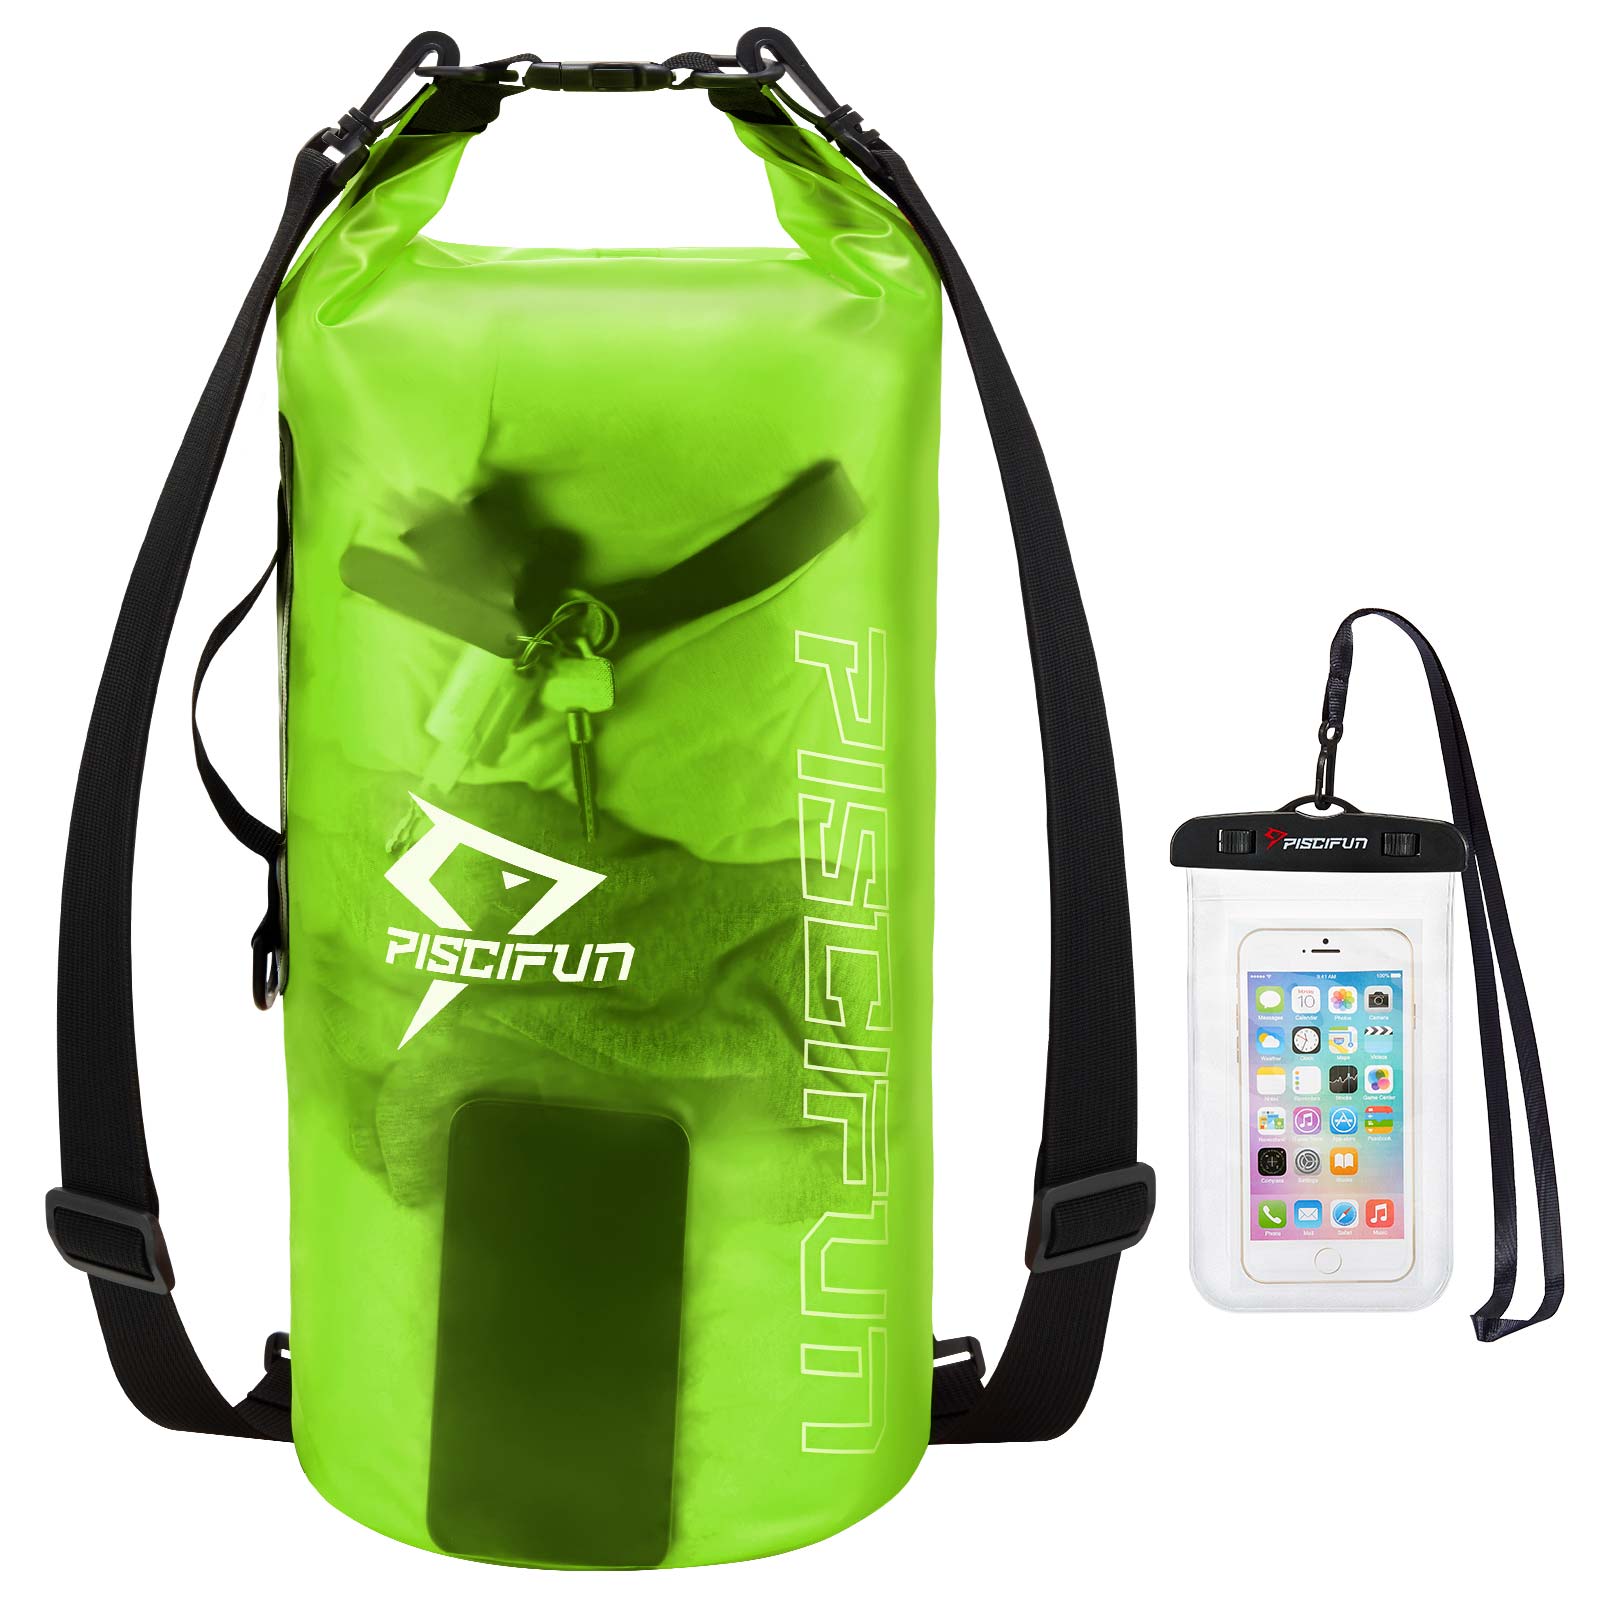 Lightahead Transparent Waterproof Dry Bag 10L with Free phone carrying